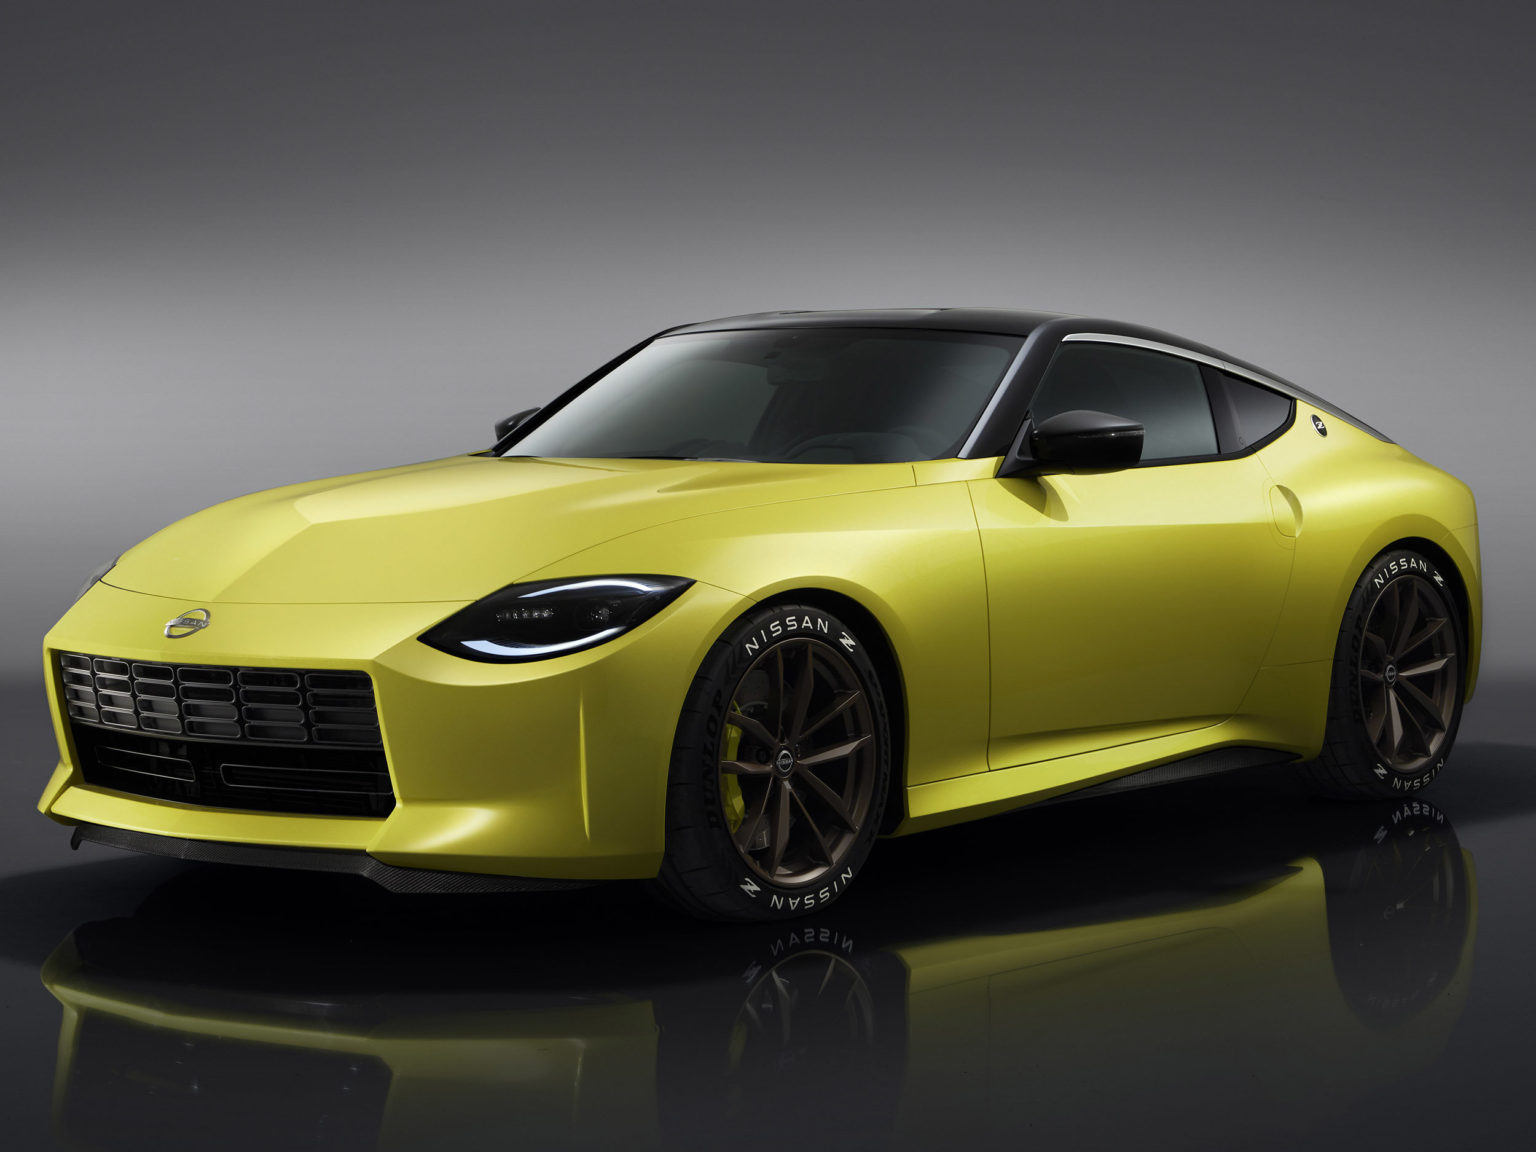 The Nissan Z Proto is the next step in the Z story.